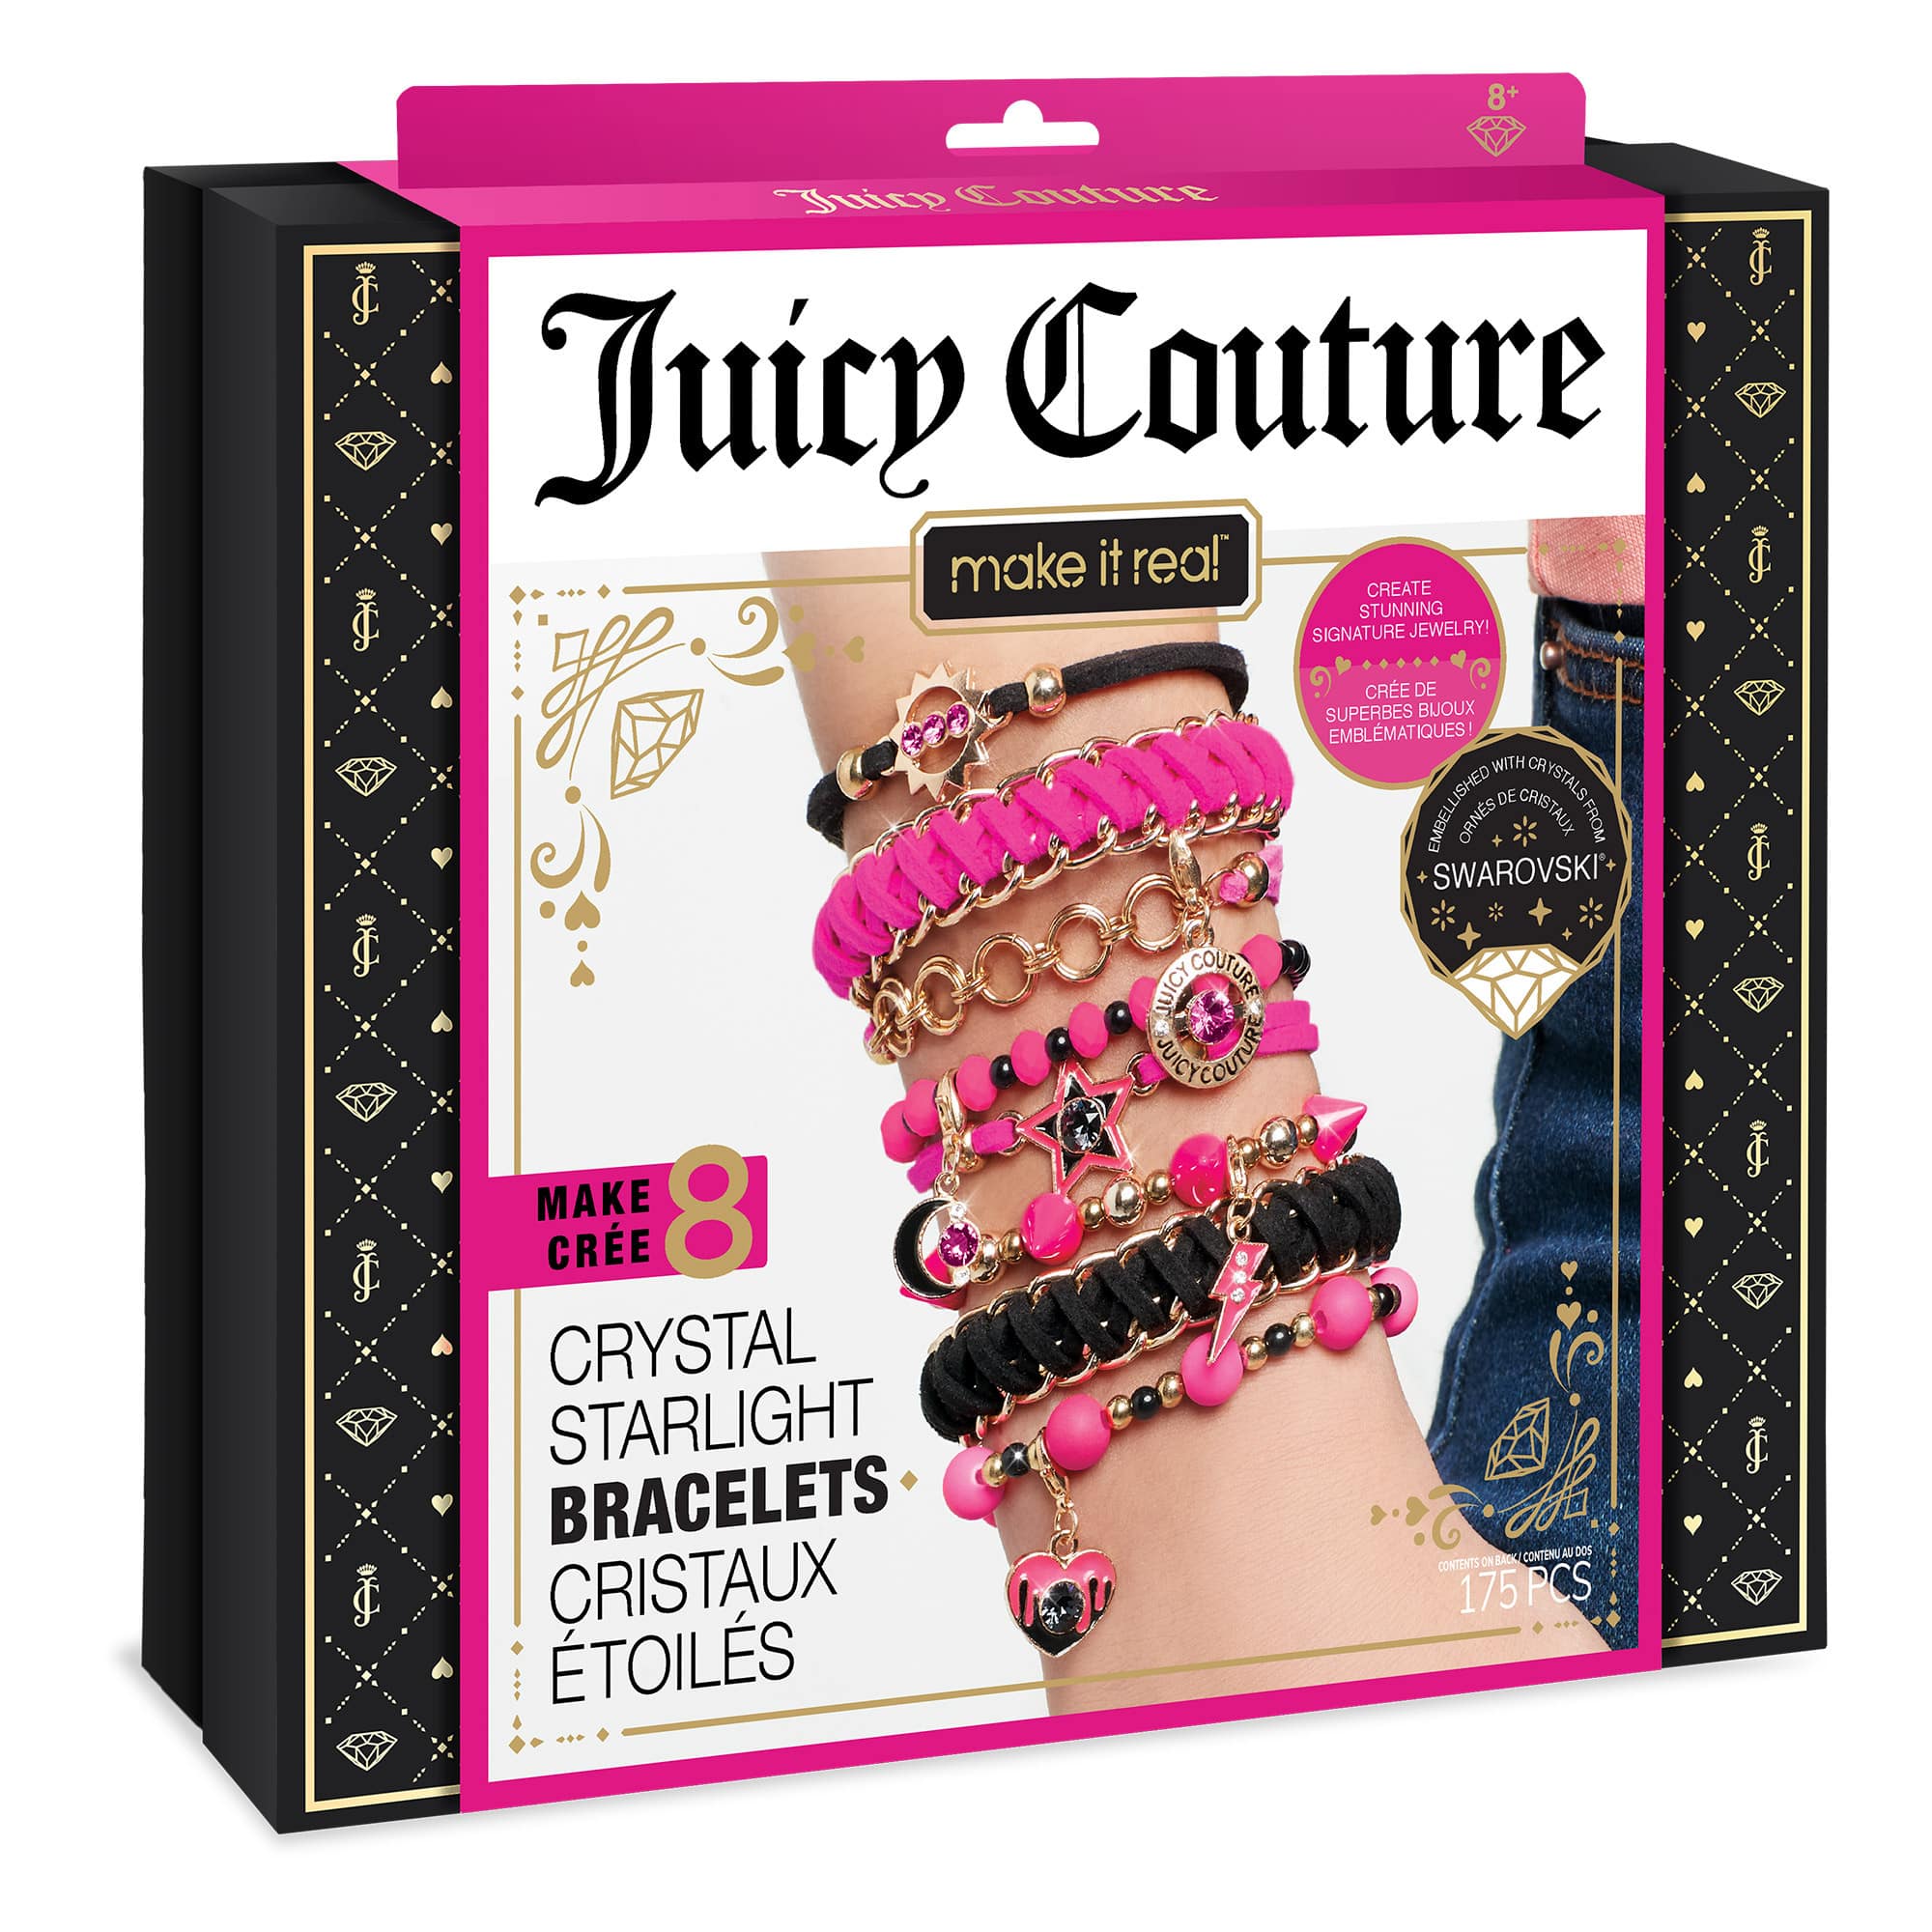 Make It Real - Juicy Couture - Crystal Starlight Bracelets with Swarovski Crystals